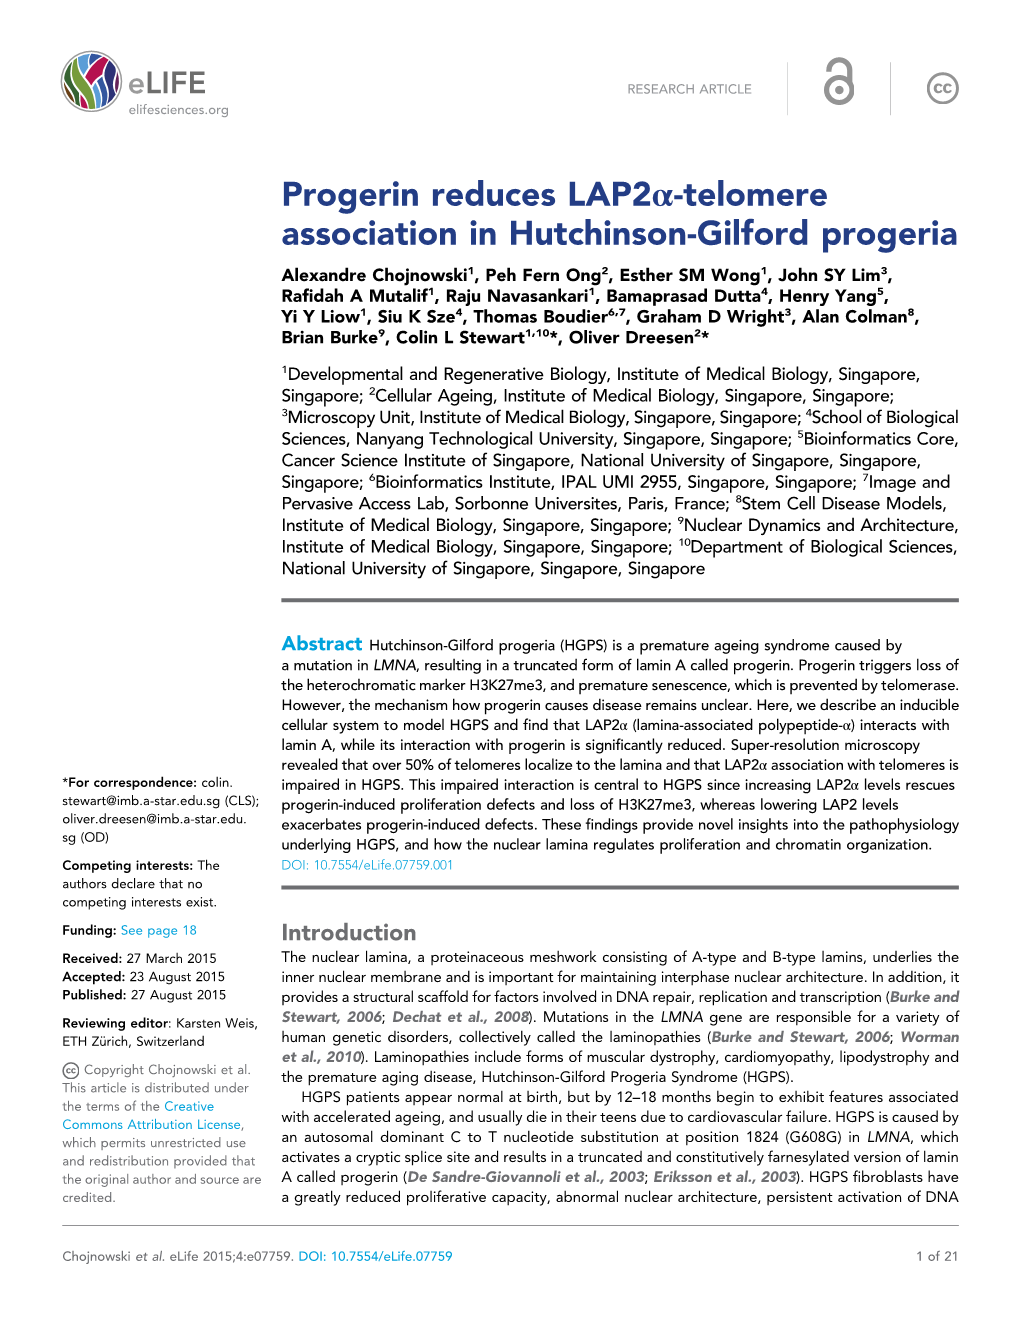 Progerin Reduces Lap2α-Telomere Association in Hutchinson-Gilford